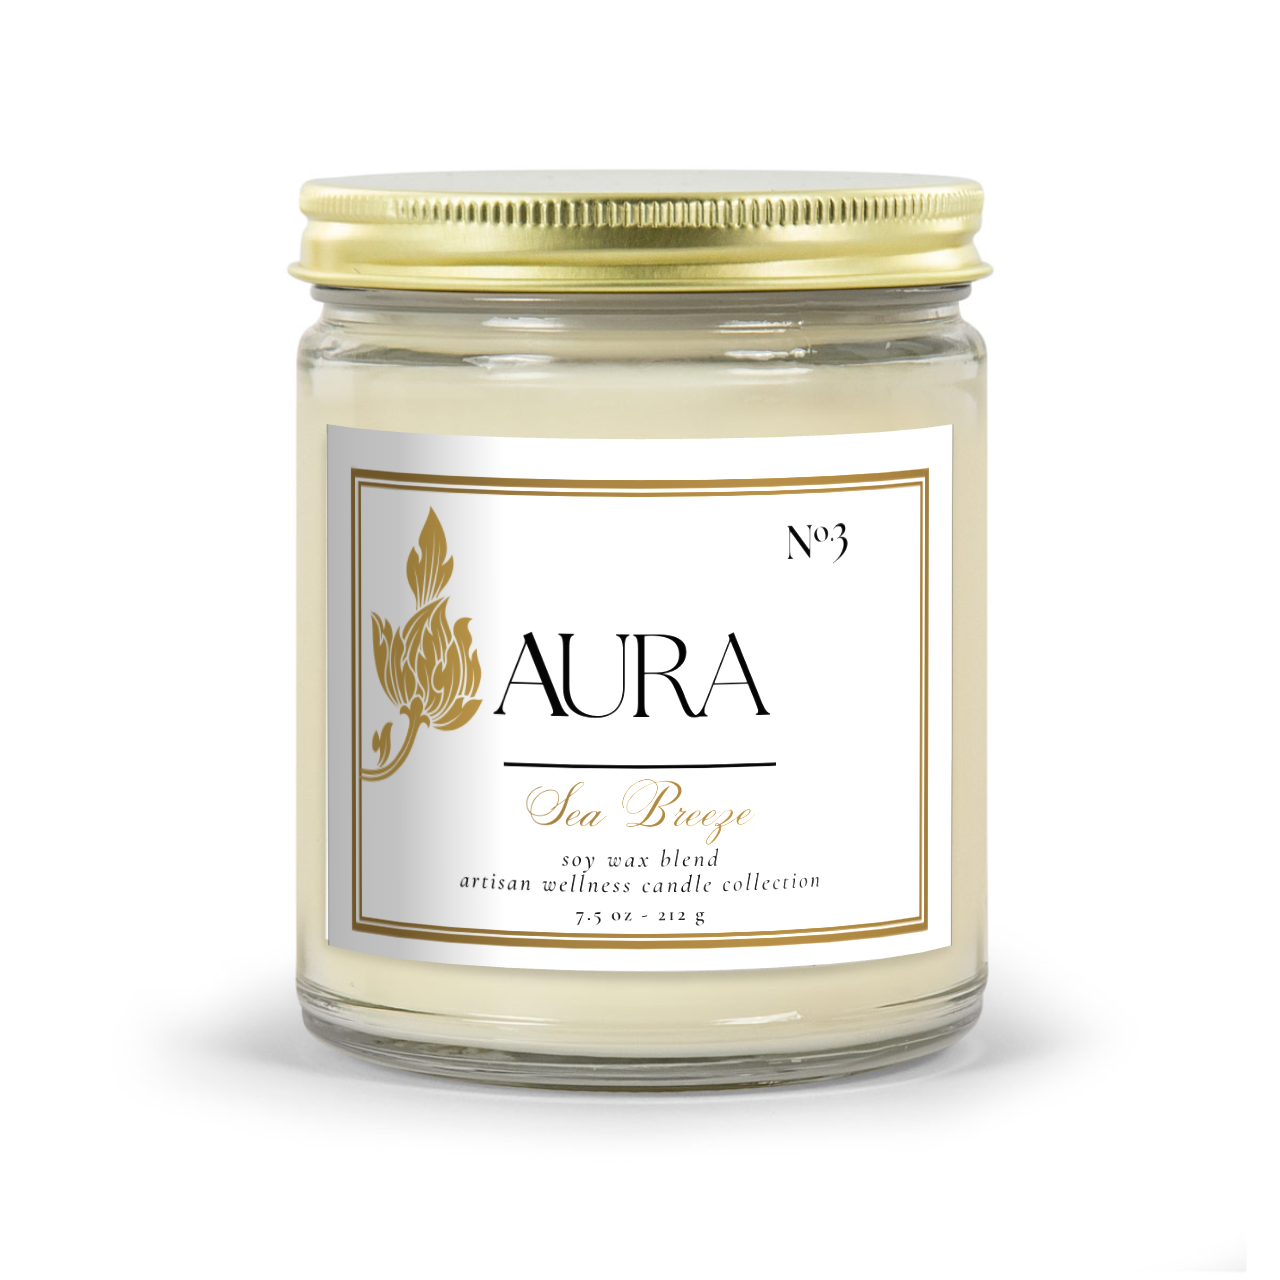 Aromatherapy Candle - Aura Aromas Artisan Wellness Candle Collection:  Classic Amber Or Classic Clear Vessel Sea Breeze Scent